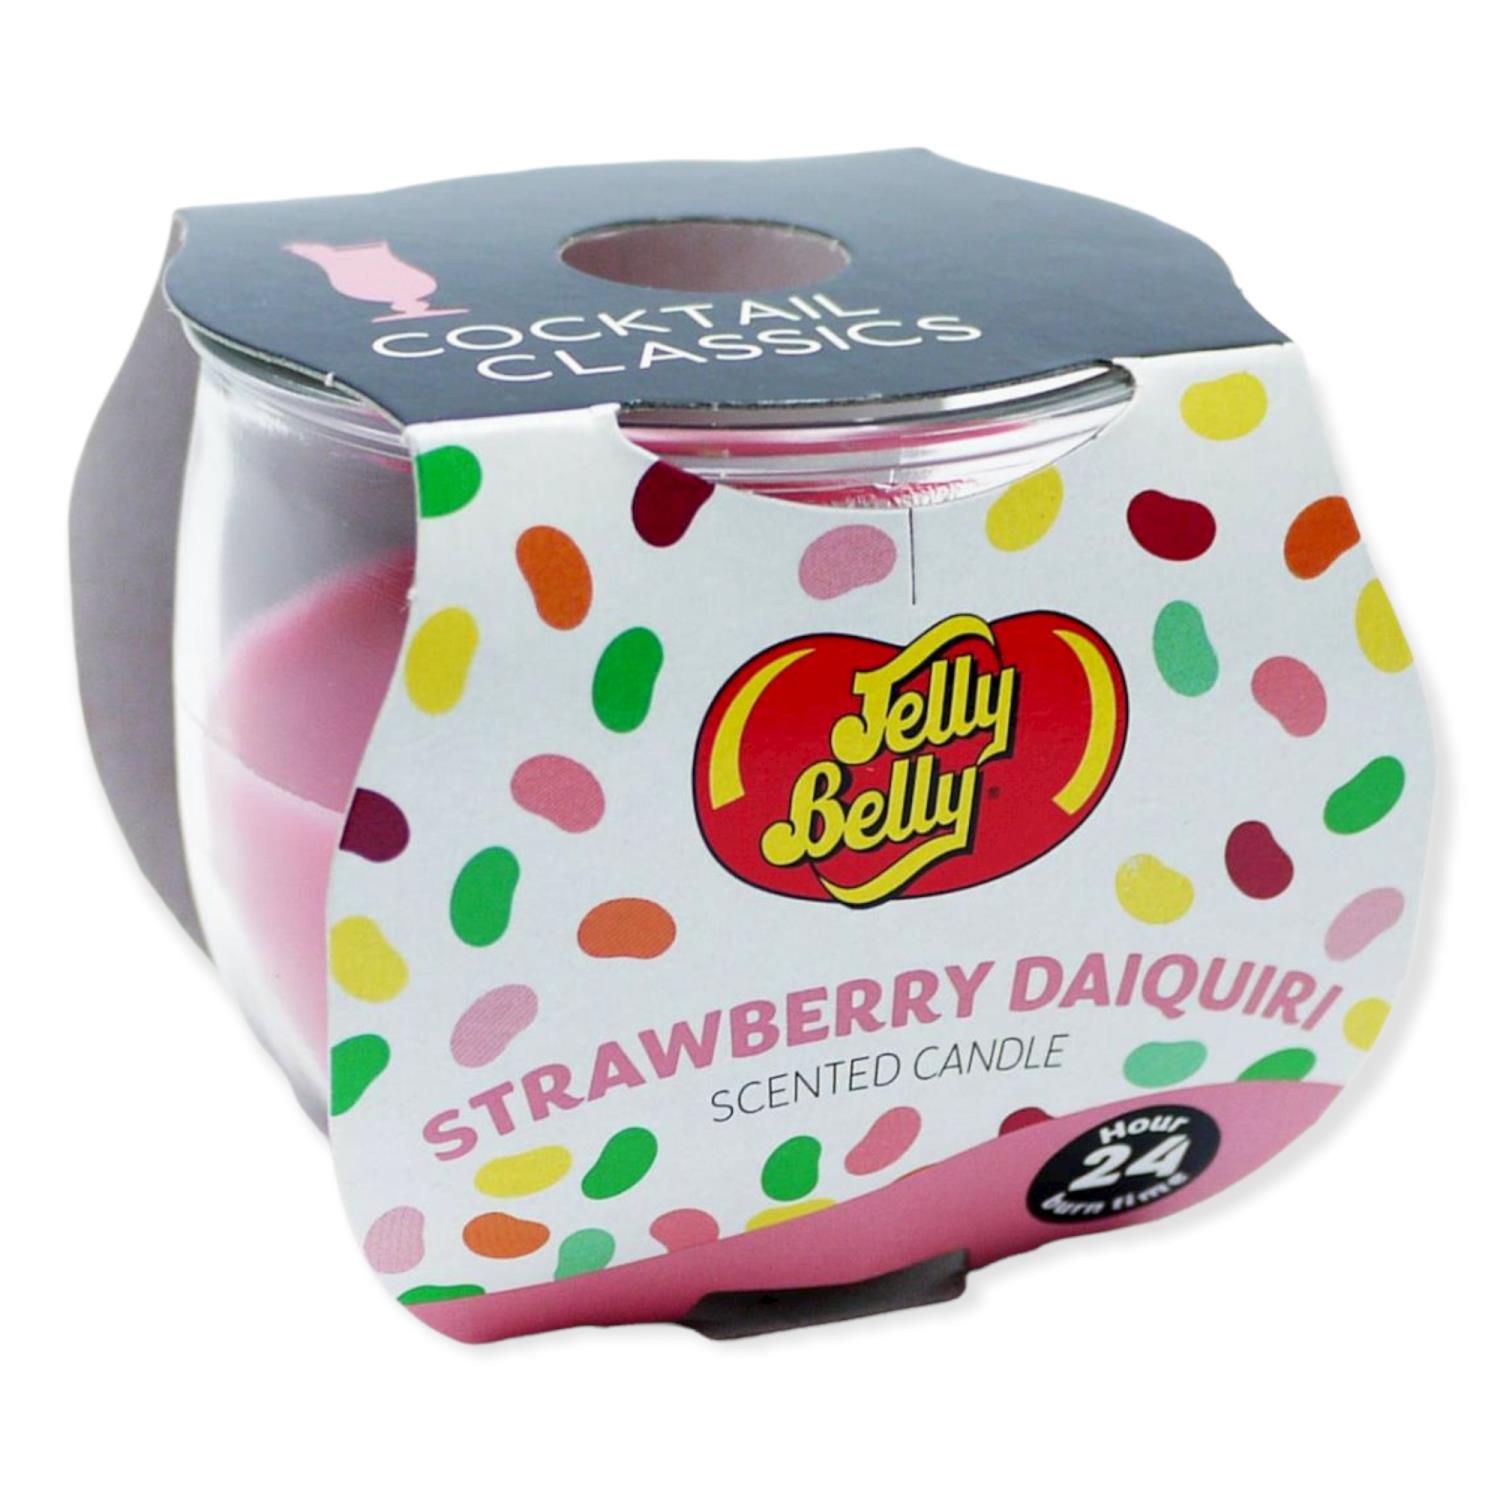 Jelly Belly Strawberry Daiquiri Candle 85g